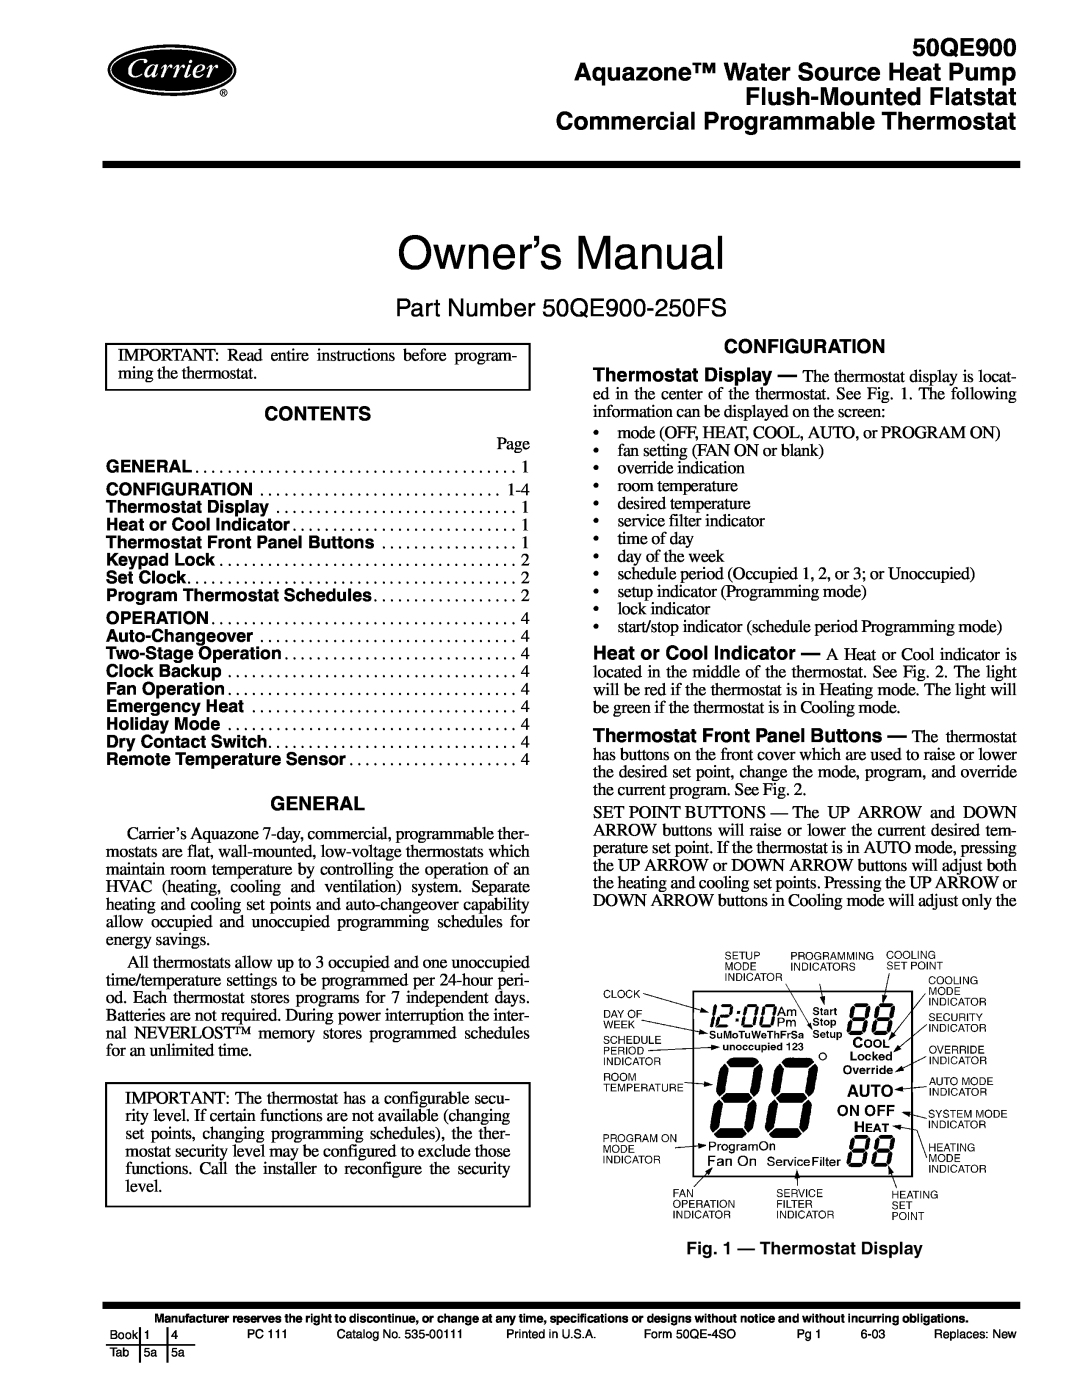 Carrier owner manual Contents, General, Configuration, Thermostat Display, Part Number 50QE900-250FS 